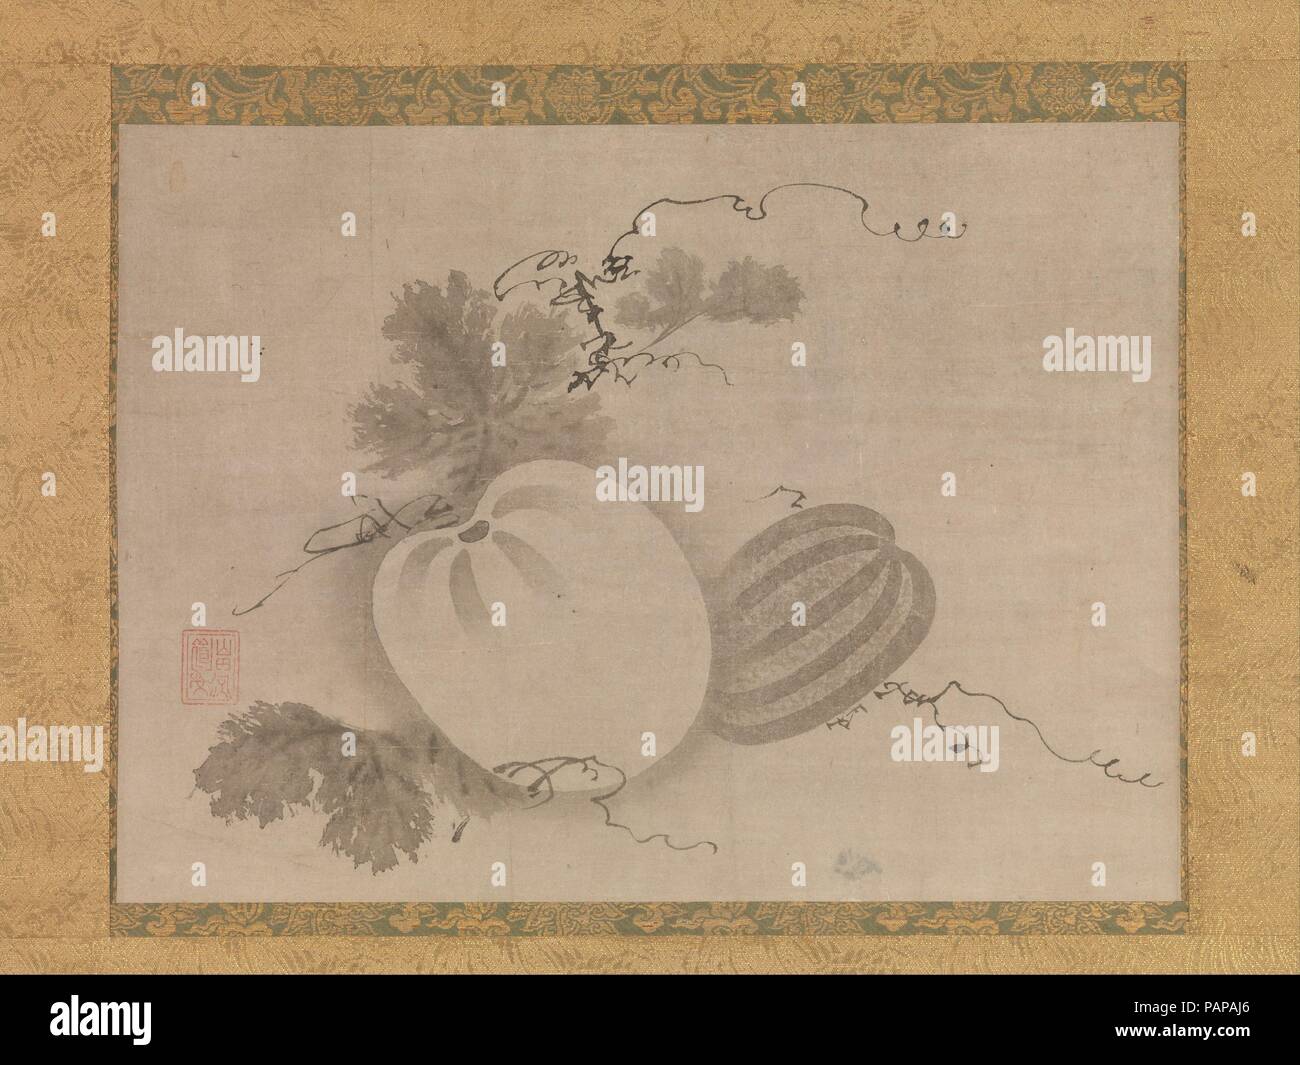 Melons. Artist: Yamada Doan (Japanese, second half of the 16th century). Culture: Japan. Dimensions: Image: 13 1/4 × 18 1/8 in. (33.6 × 46 cm)  Overall with mounting: 47 1/2 × 23 7/8 in. (120.7 × 60.6 cm)  Overall with knobs: 47 1/2 × 25 13/16 in. (120.7 × 65.5 cm). Date: late 16th century.  Images of fruits and vegetables were often displayed in Zen temples as symbolic offerings to Buddhist icons. Although similar images were produced earlier in Song dynasty China, ink paintings of isolated fruits or vegetables became popular in Japan during the late Muromachi period, when they were associate Stock Photo